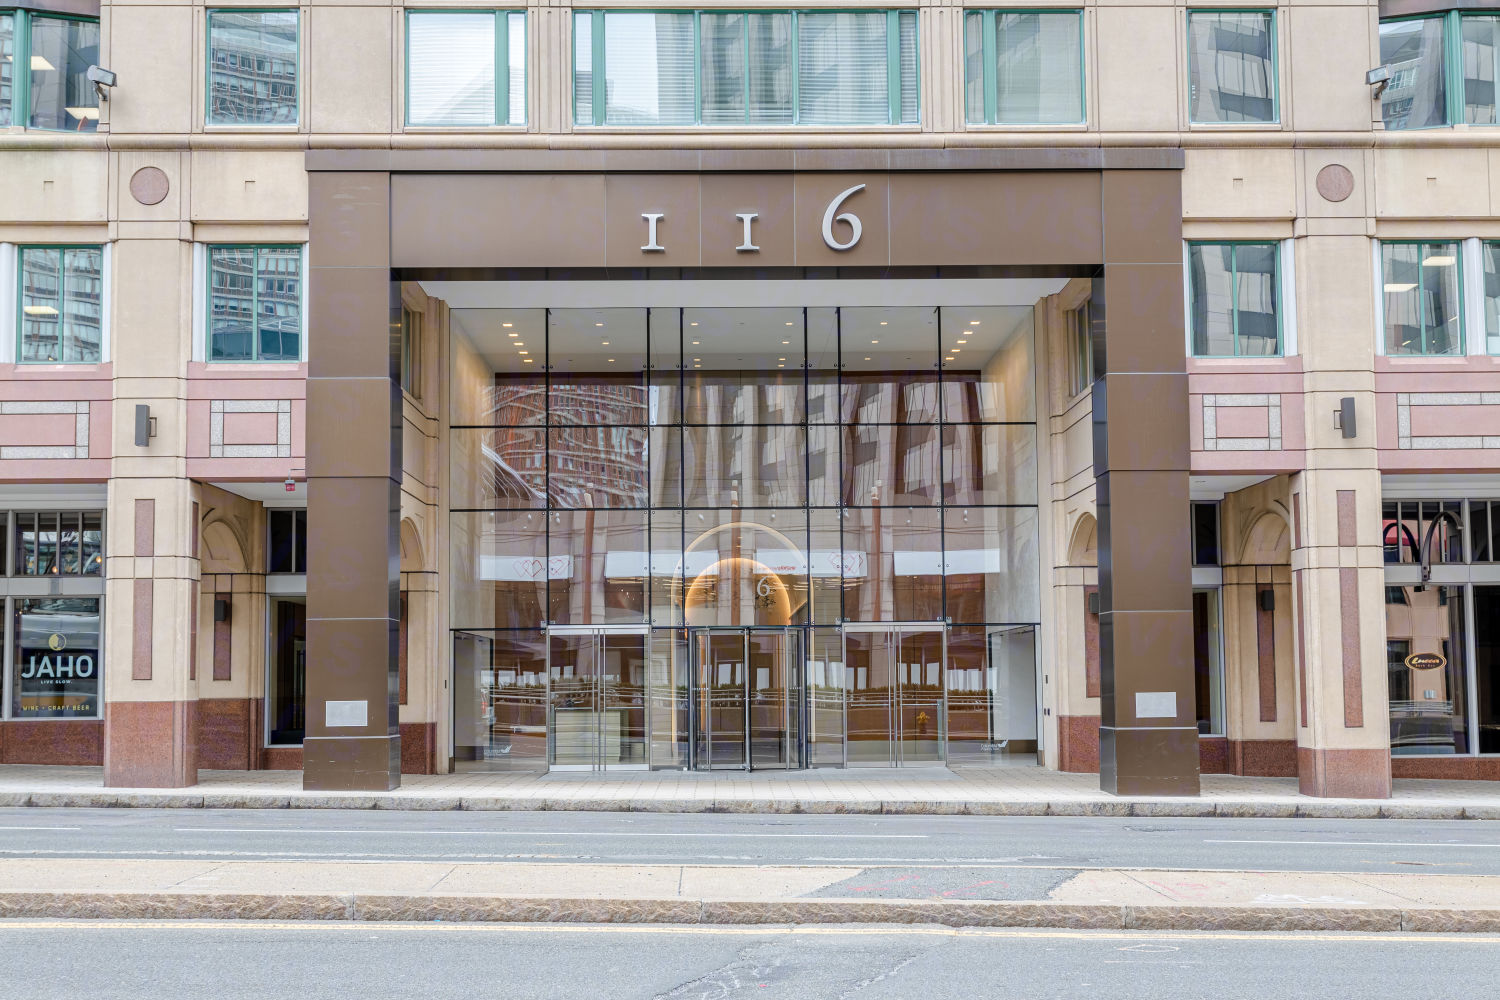 116 Huntington Avenue, Boston, MA Commercial Space for Rent